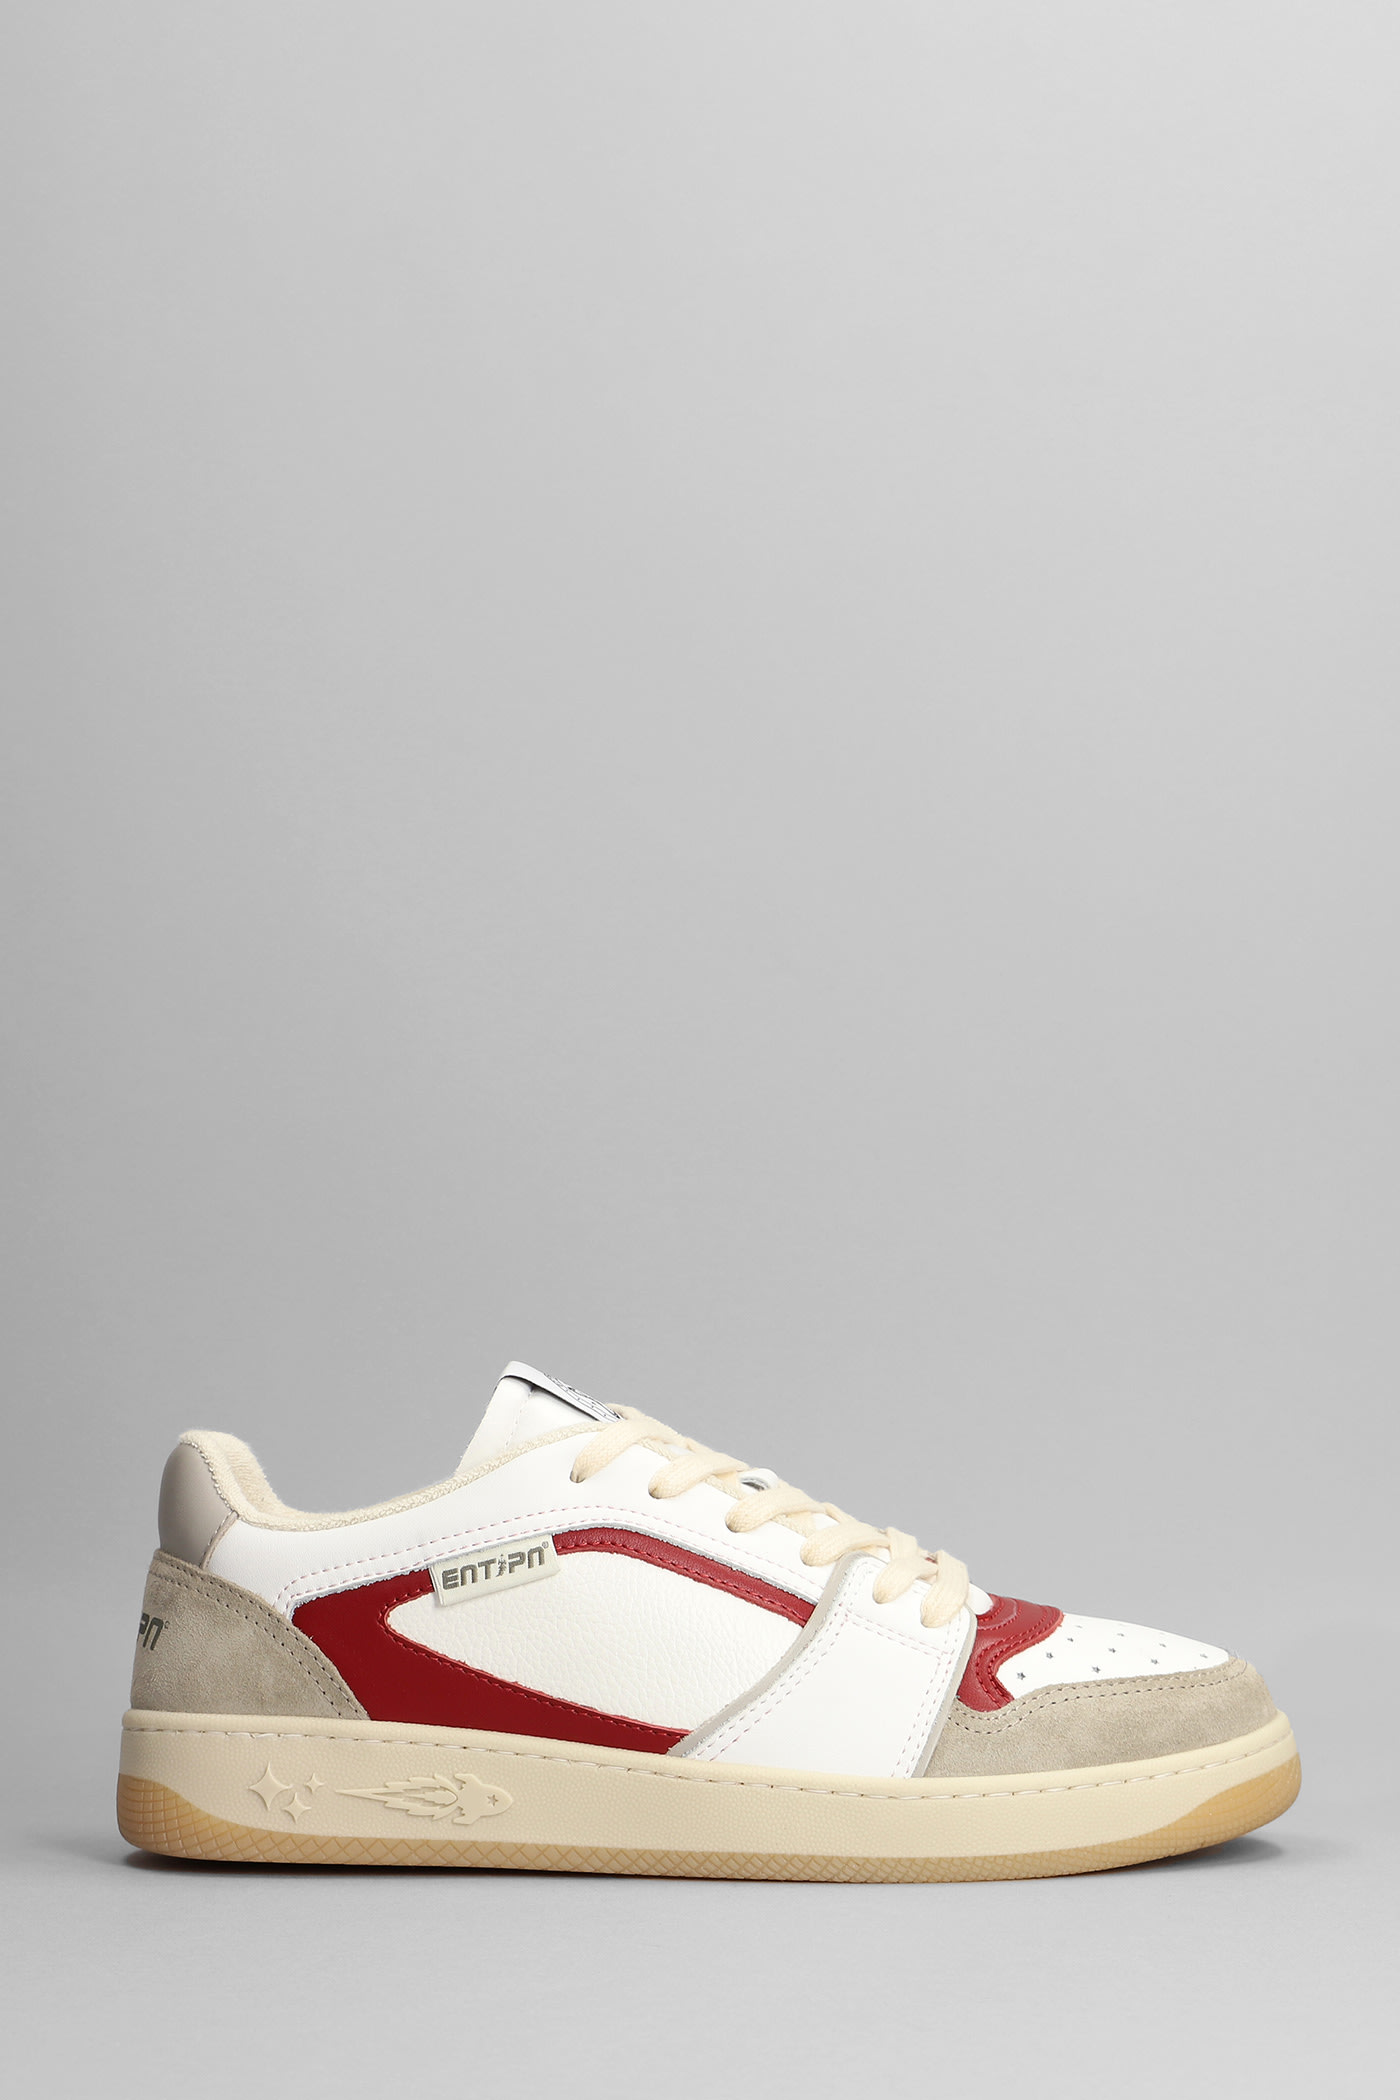 Enterprise Japan Tag Sneakers In White Suede And Leather